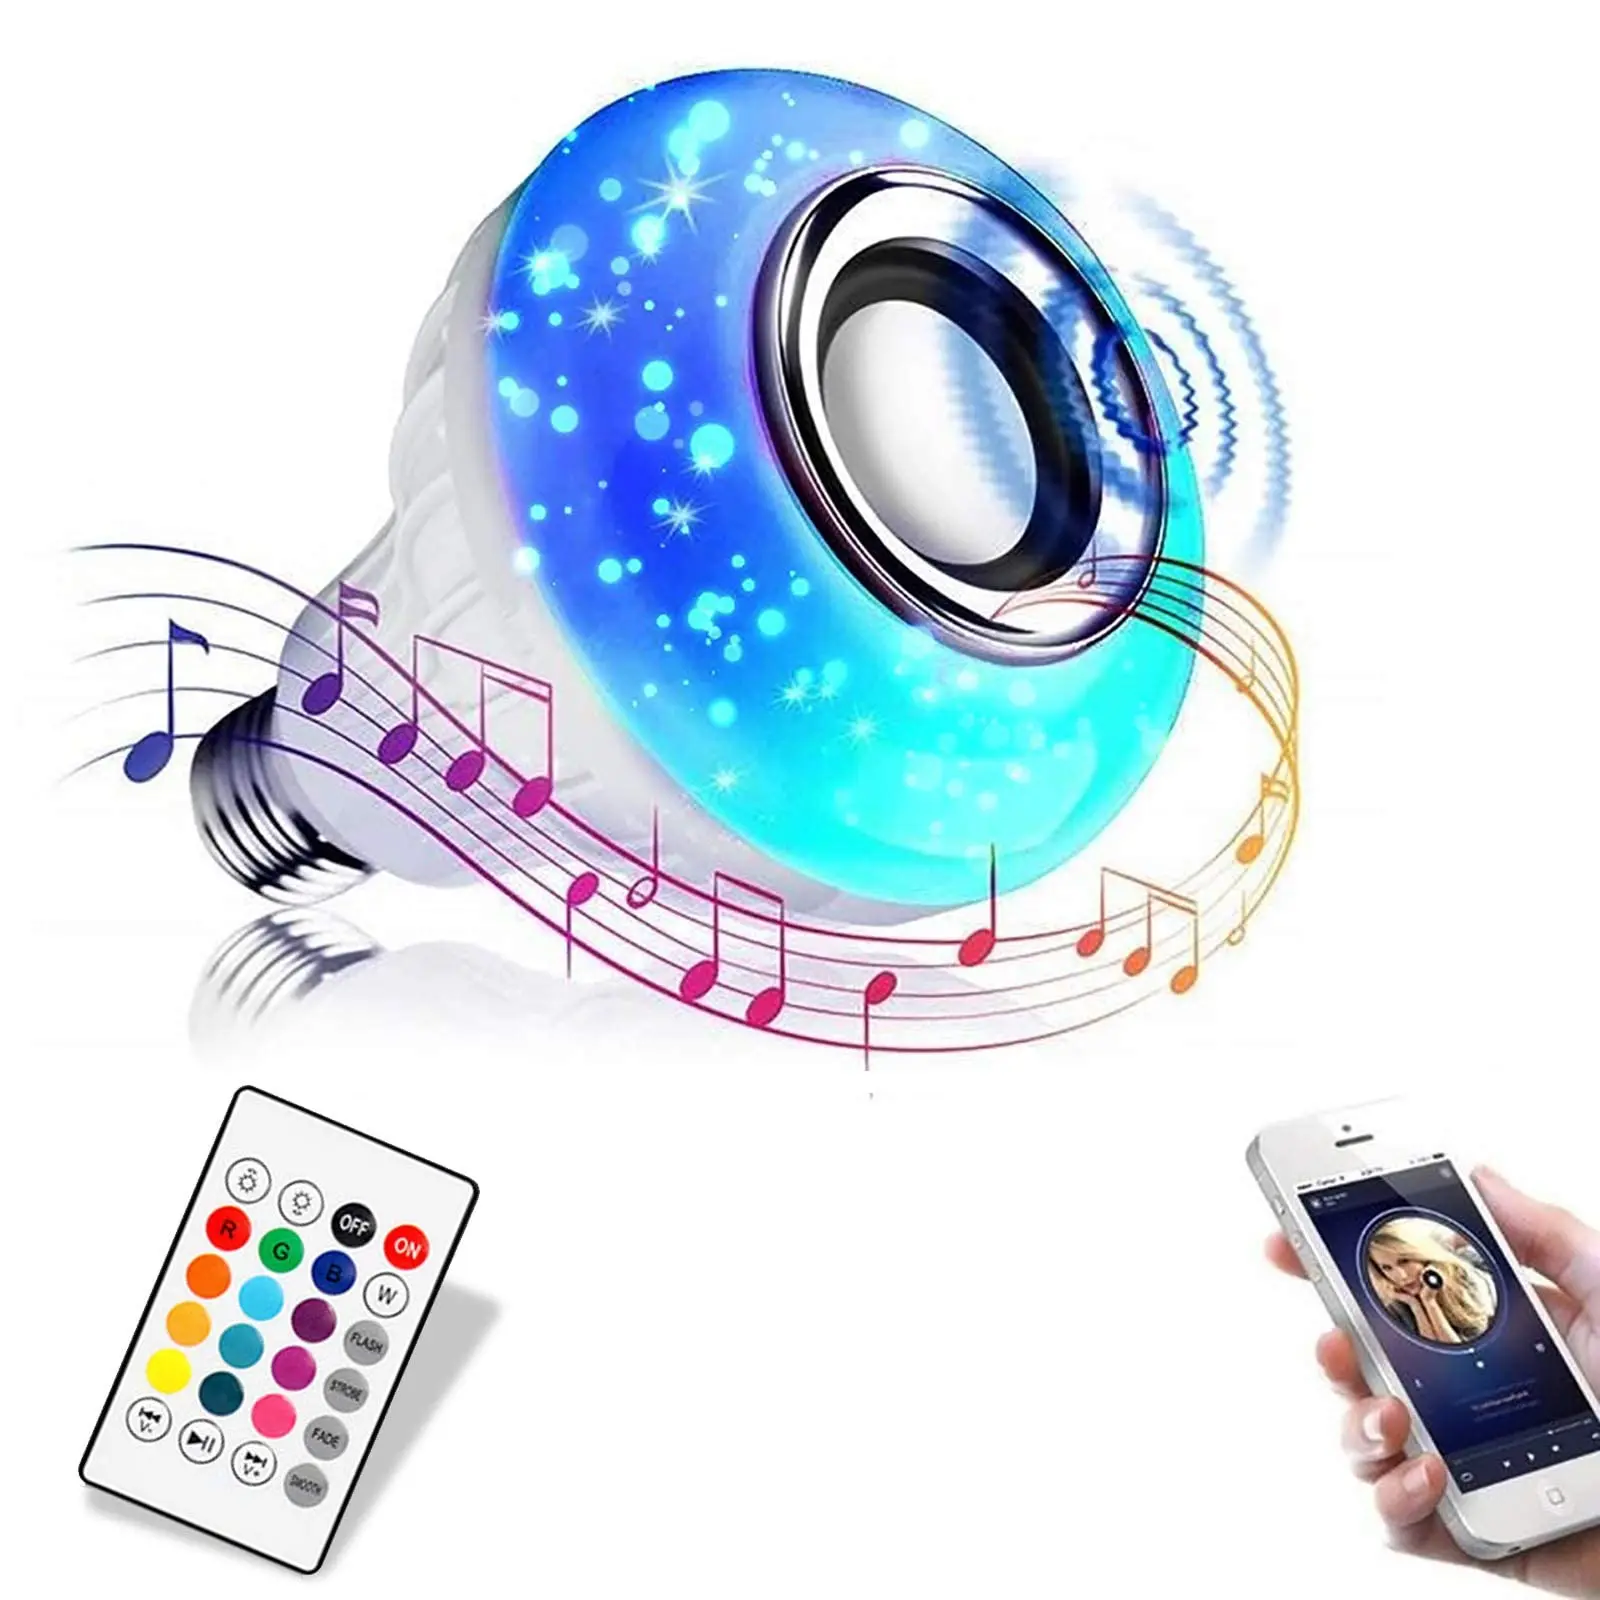 

E27 Smart RGB RGBW Wireless Bluetooth Speaker Bulb 12W LED Lamp Light Music Player Dimmable Audio 24 Keys Remote Controller